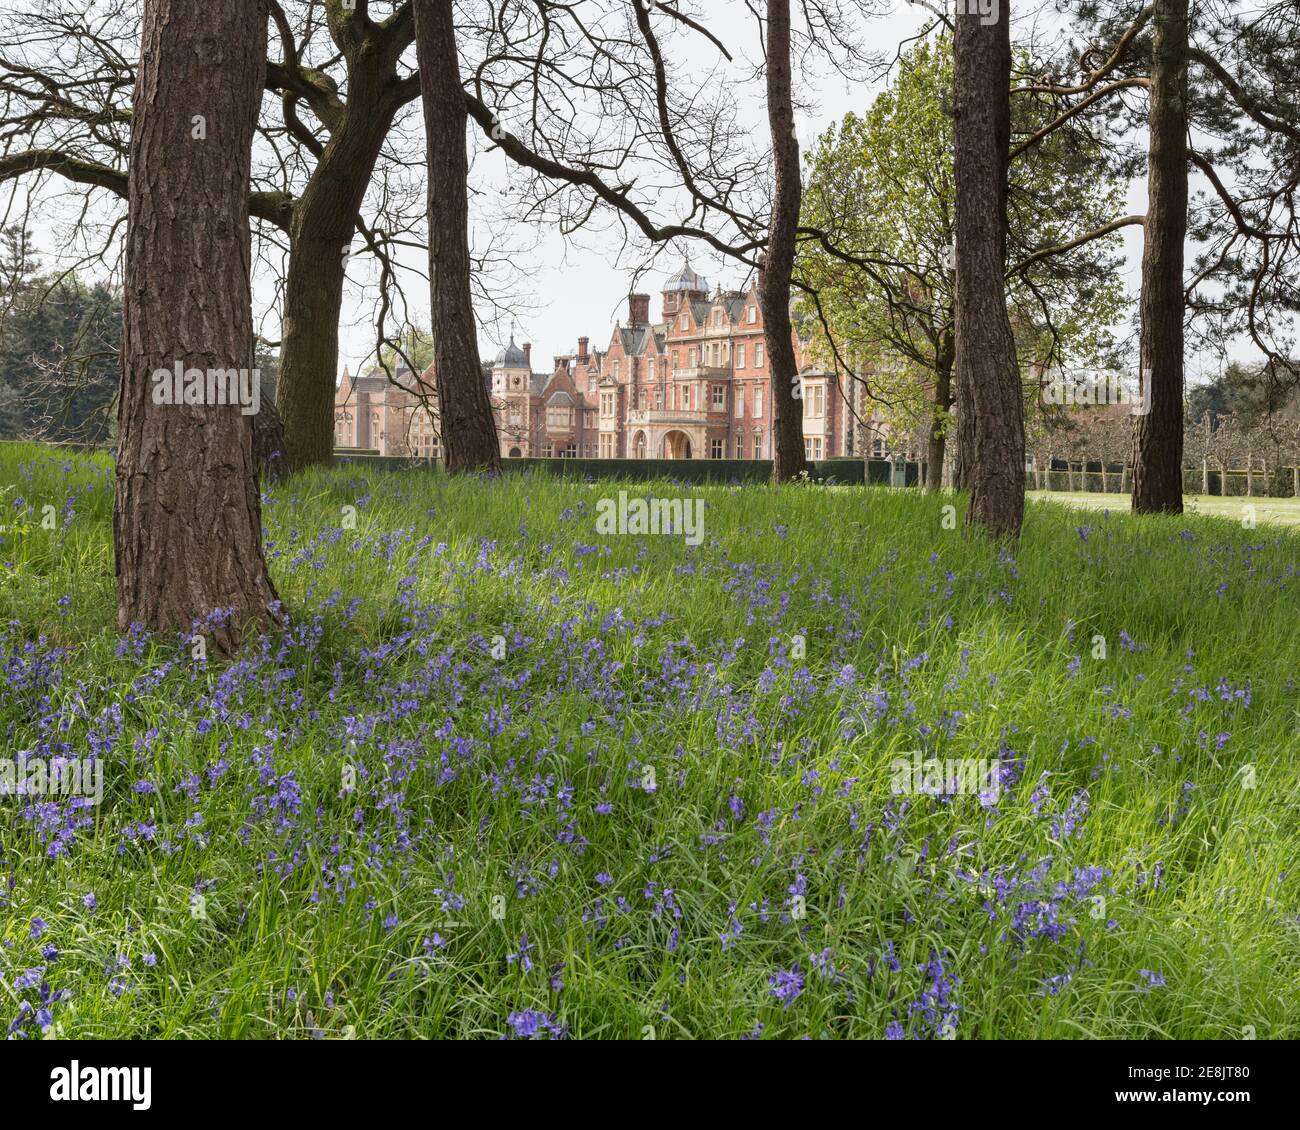 UK, Norfolk, Sandringham Estate, 2019, April, 23: View of the house and grounds, Sandringham House, Queen Elizabeth II's country residence in Norfolk, Stock Photo